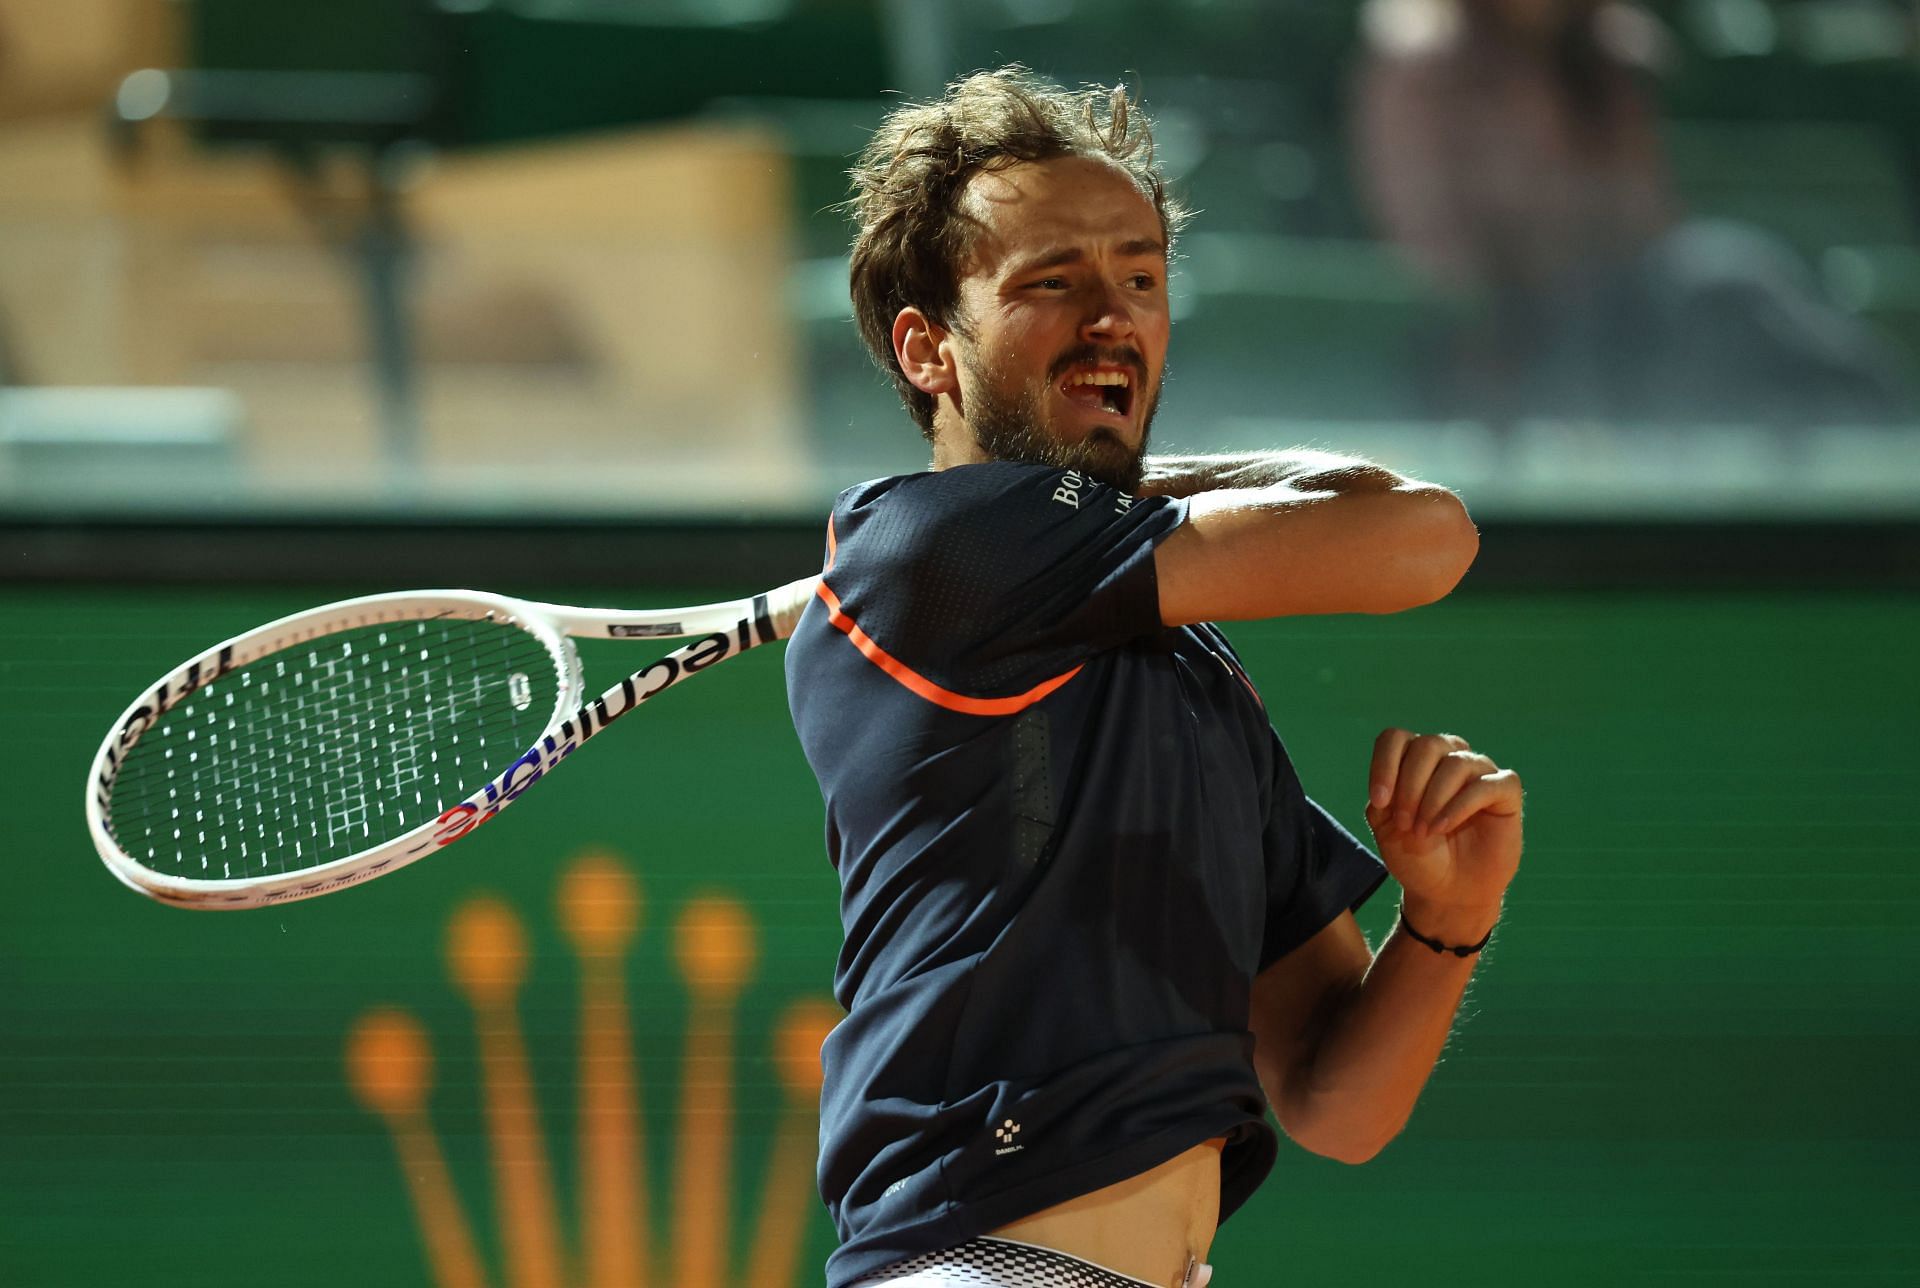 Daniil Medvedev at the Rolex Monte-Carlo Masters - Day Five